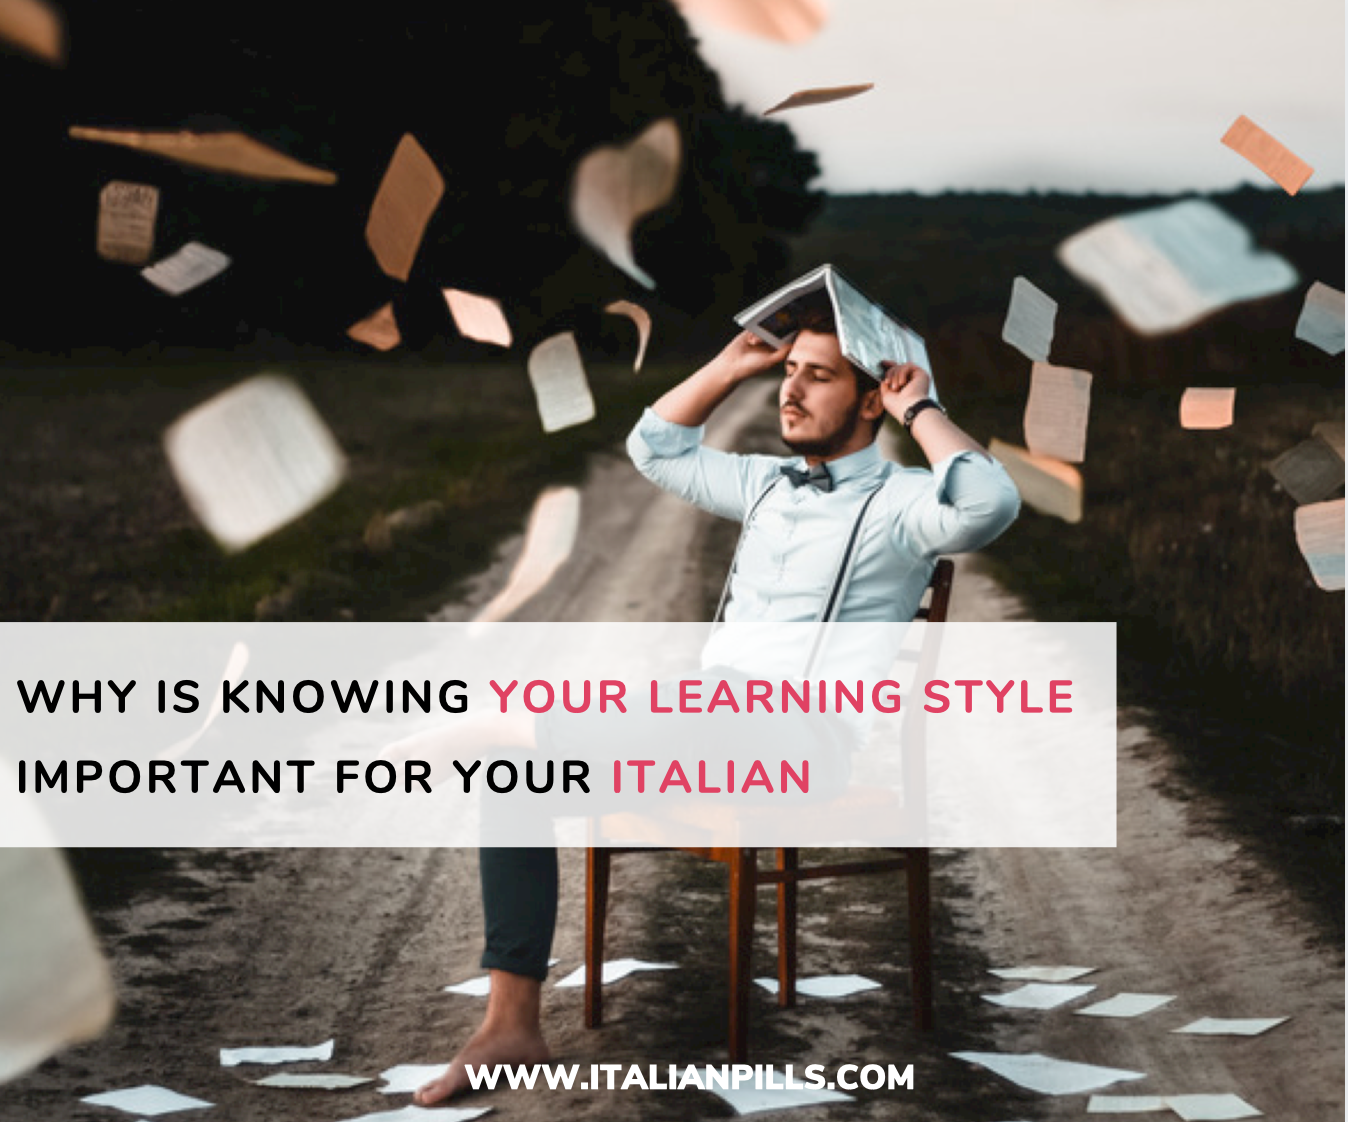 Why is knowing your learning style important for your Italian?